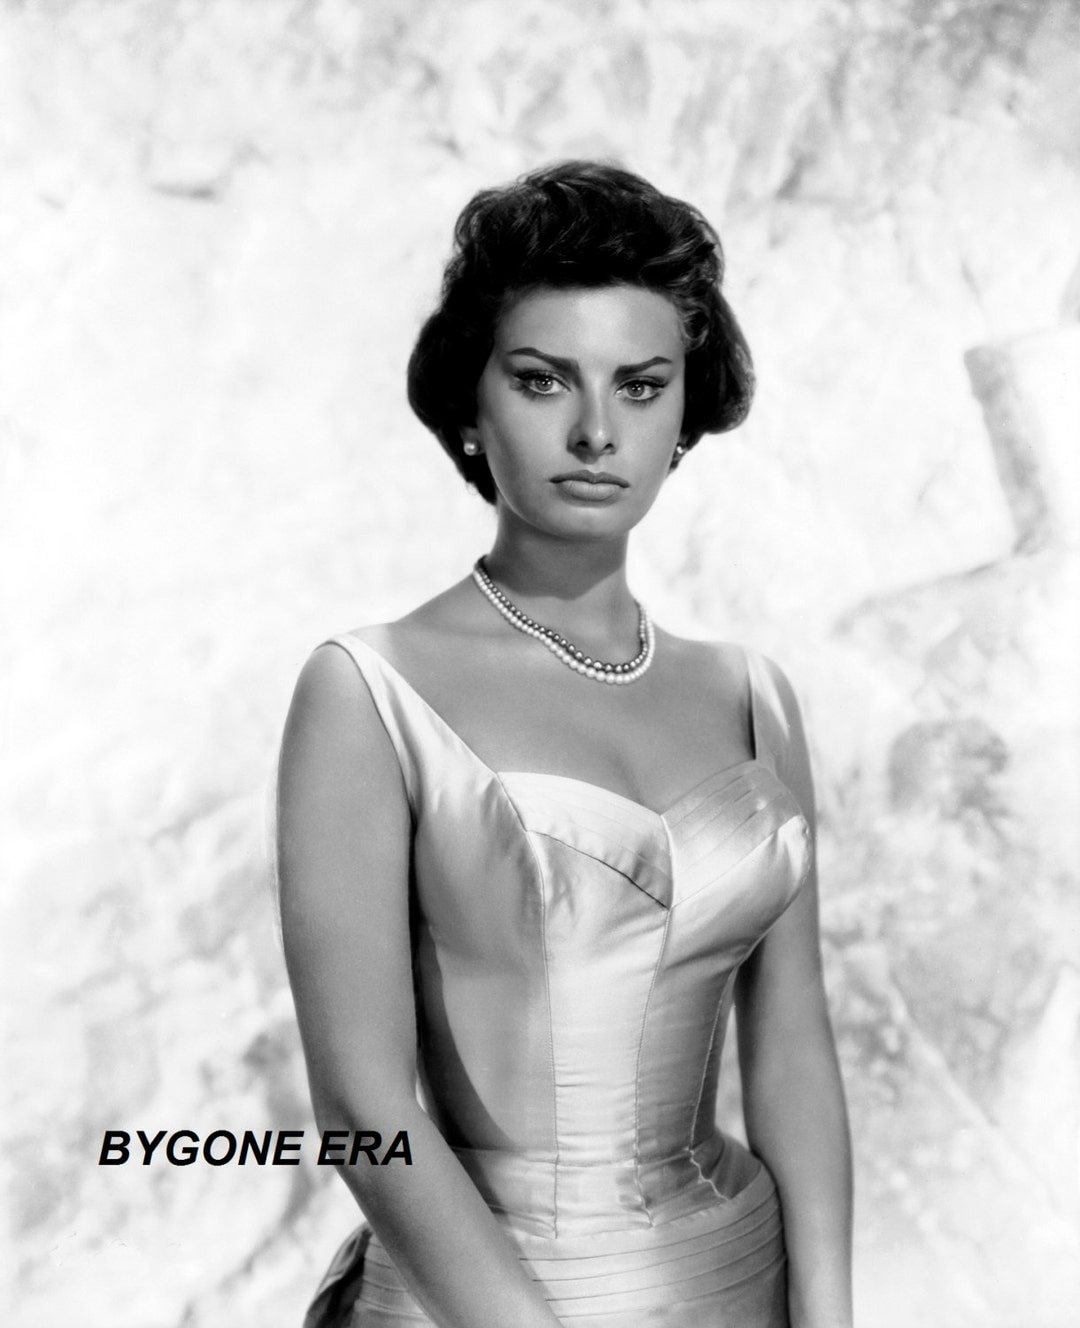 Sophia Loren Young and Beautiful Hollywood Poster Art Photo - Etsy